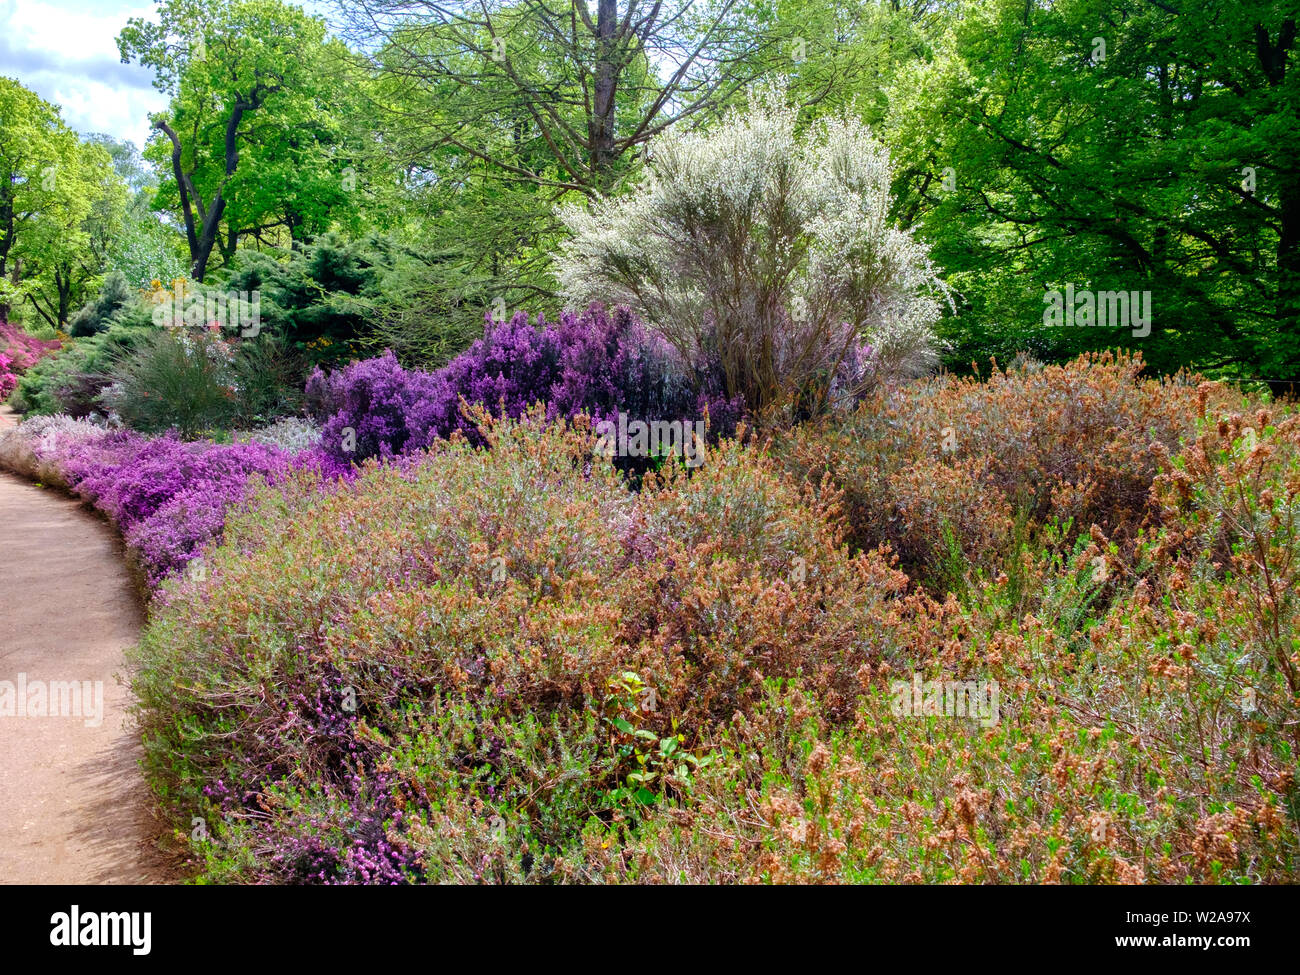 Path lined with trees, & purple, pink & white flowering bushes & shrubs in the Spring at Isabella Plantation, Richmond Park, Southwest London, England Stock Photo